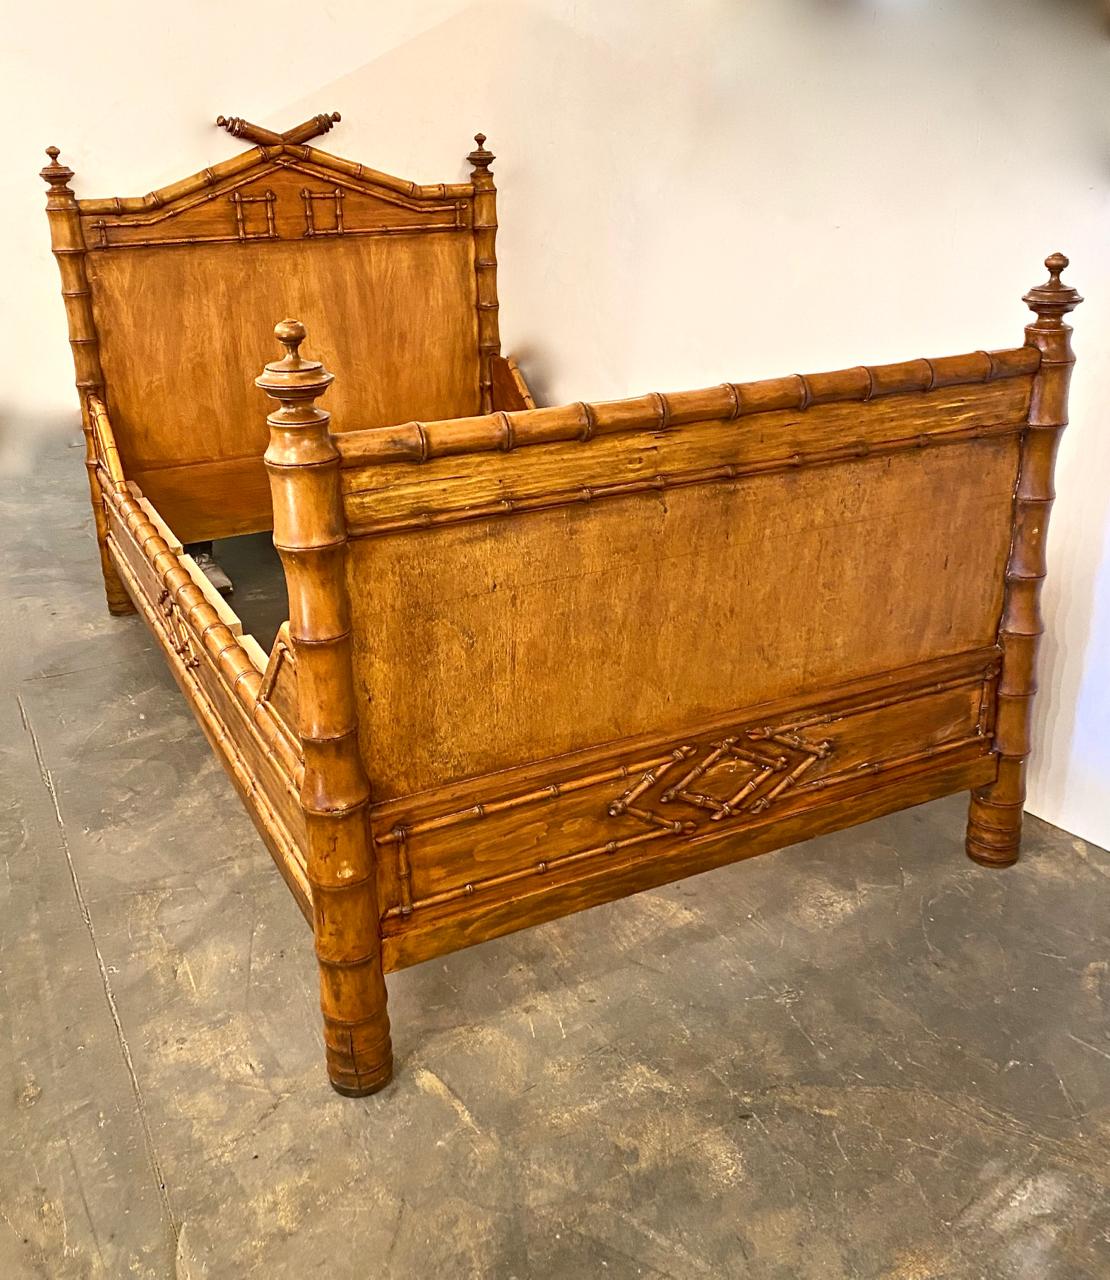 This is a superb pair of late 19th-early 20th century faux bamboo beds that retain all of their original elements. Pairs of these very desirable faux bamboo beds are unusual, especially in this condition.